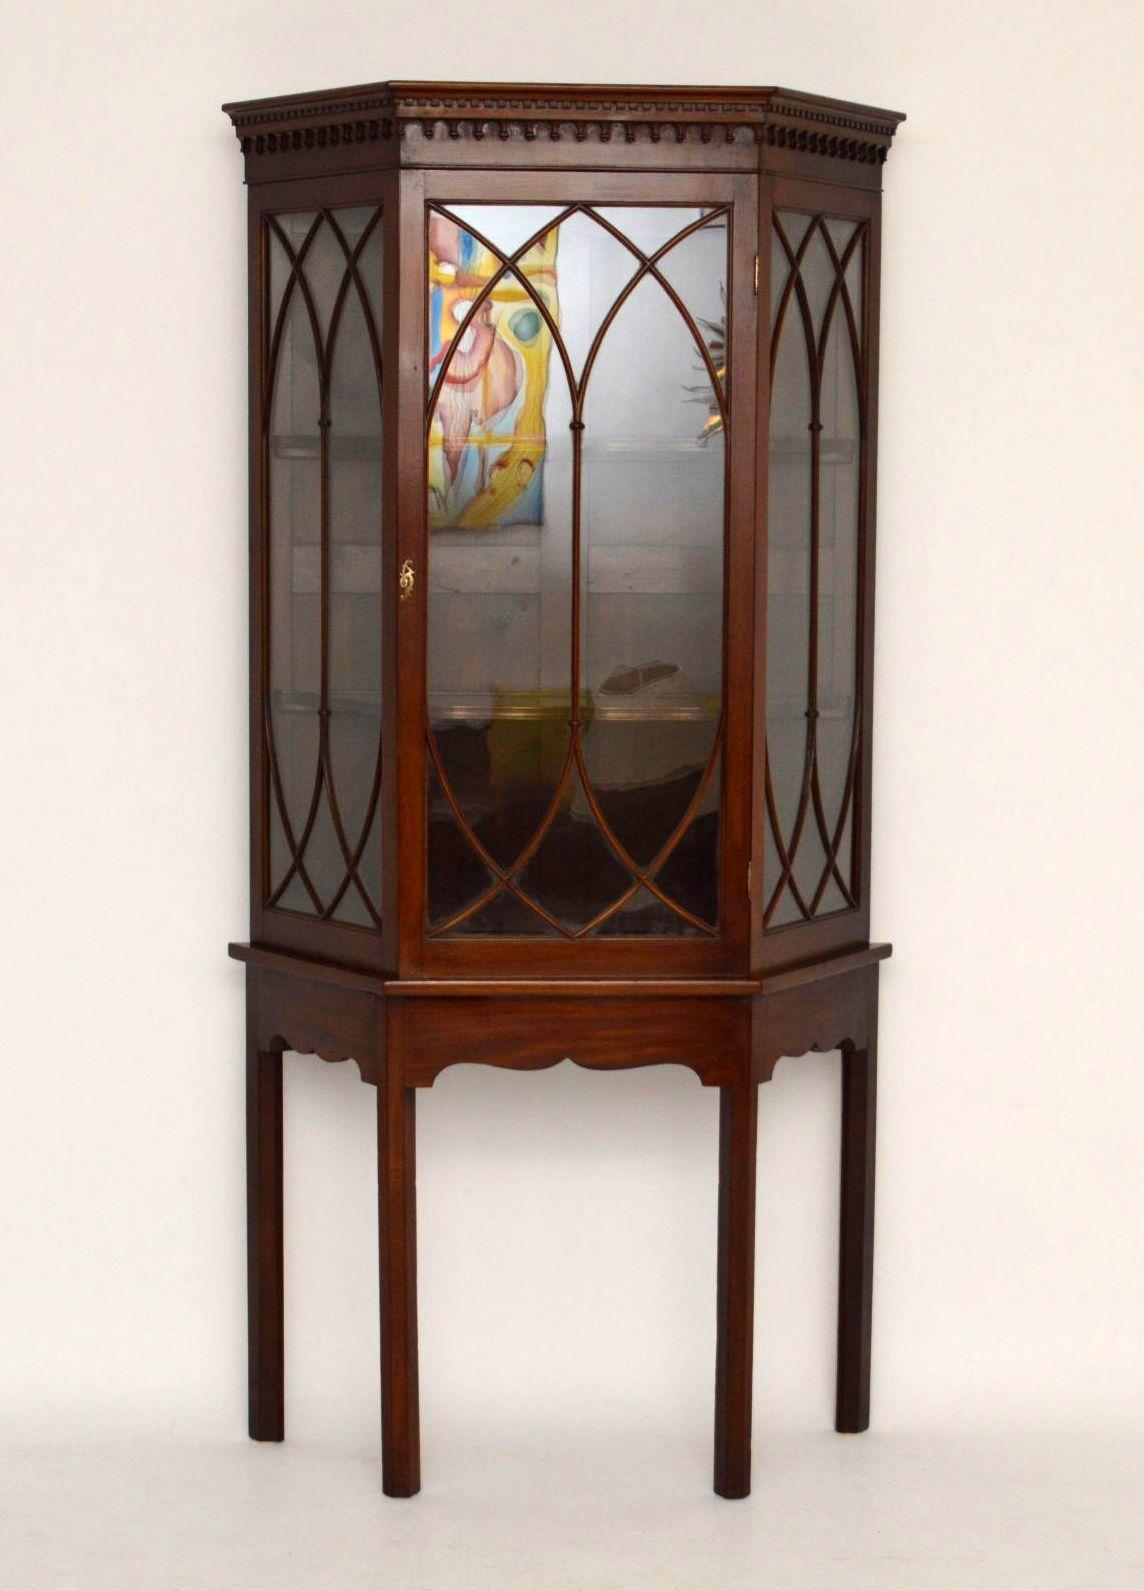 Impressive antique mahogany display cabinet in good original condition, with original color and patina. The top cornice has a dental frieze with tear drop mouldings below. The astral glazing is of Gothic design and the shelves inside the cabinet are